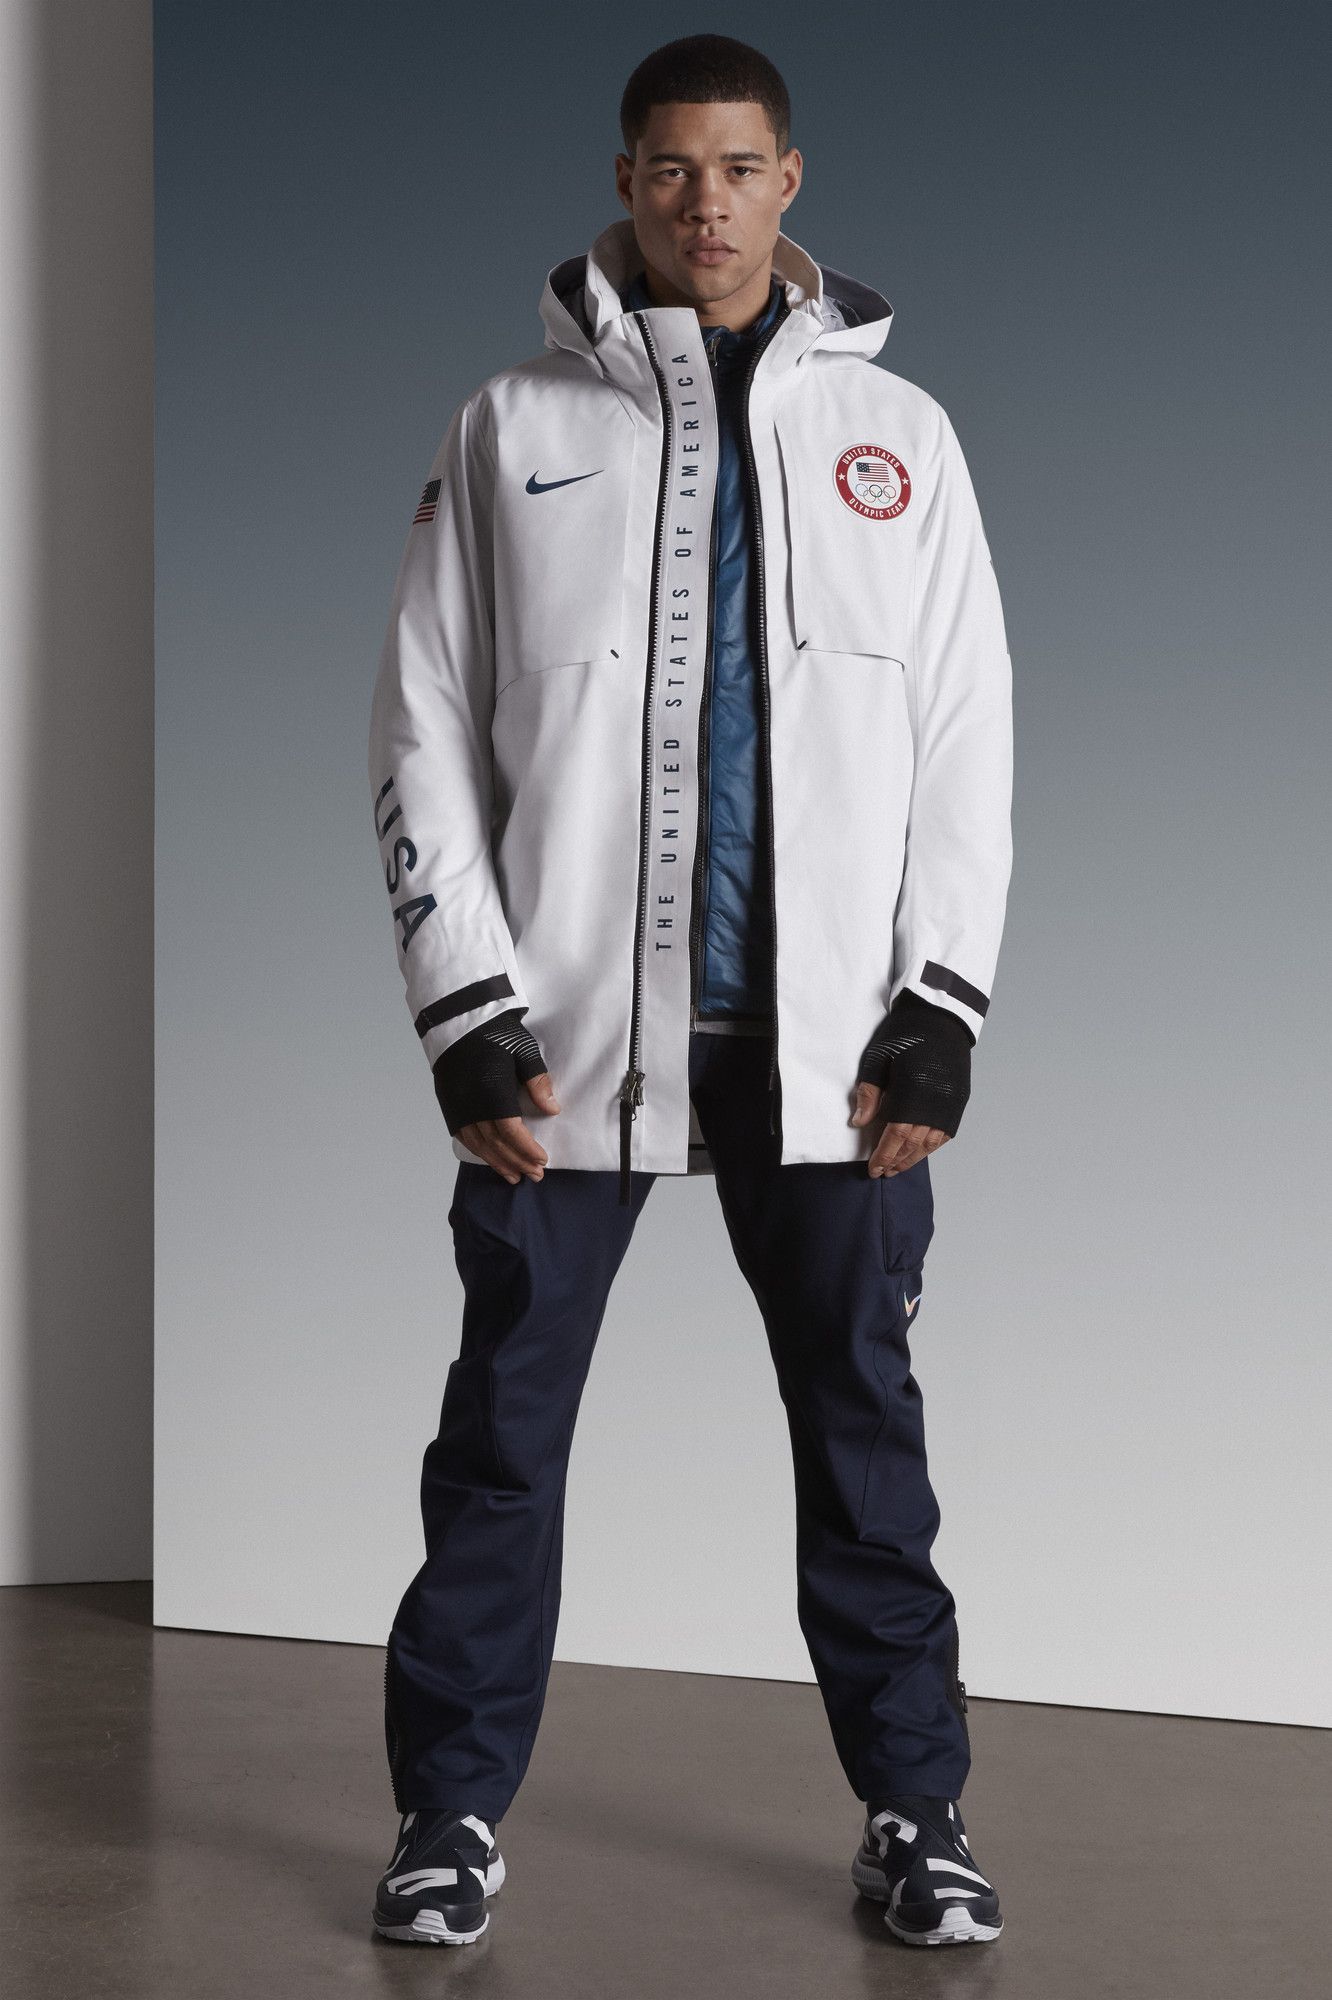 Nike Nike NikeLab Olympic Team USA Medal Stand White GoreTex Jacket Large New Size US L / EU 52-54 / 3 - 6 Preview